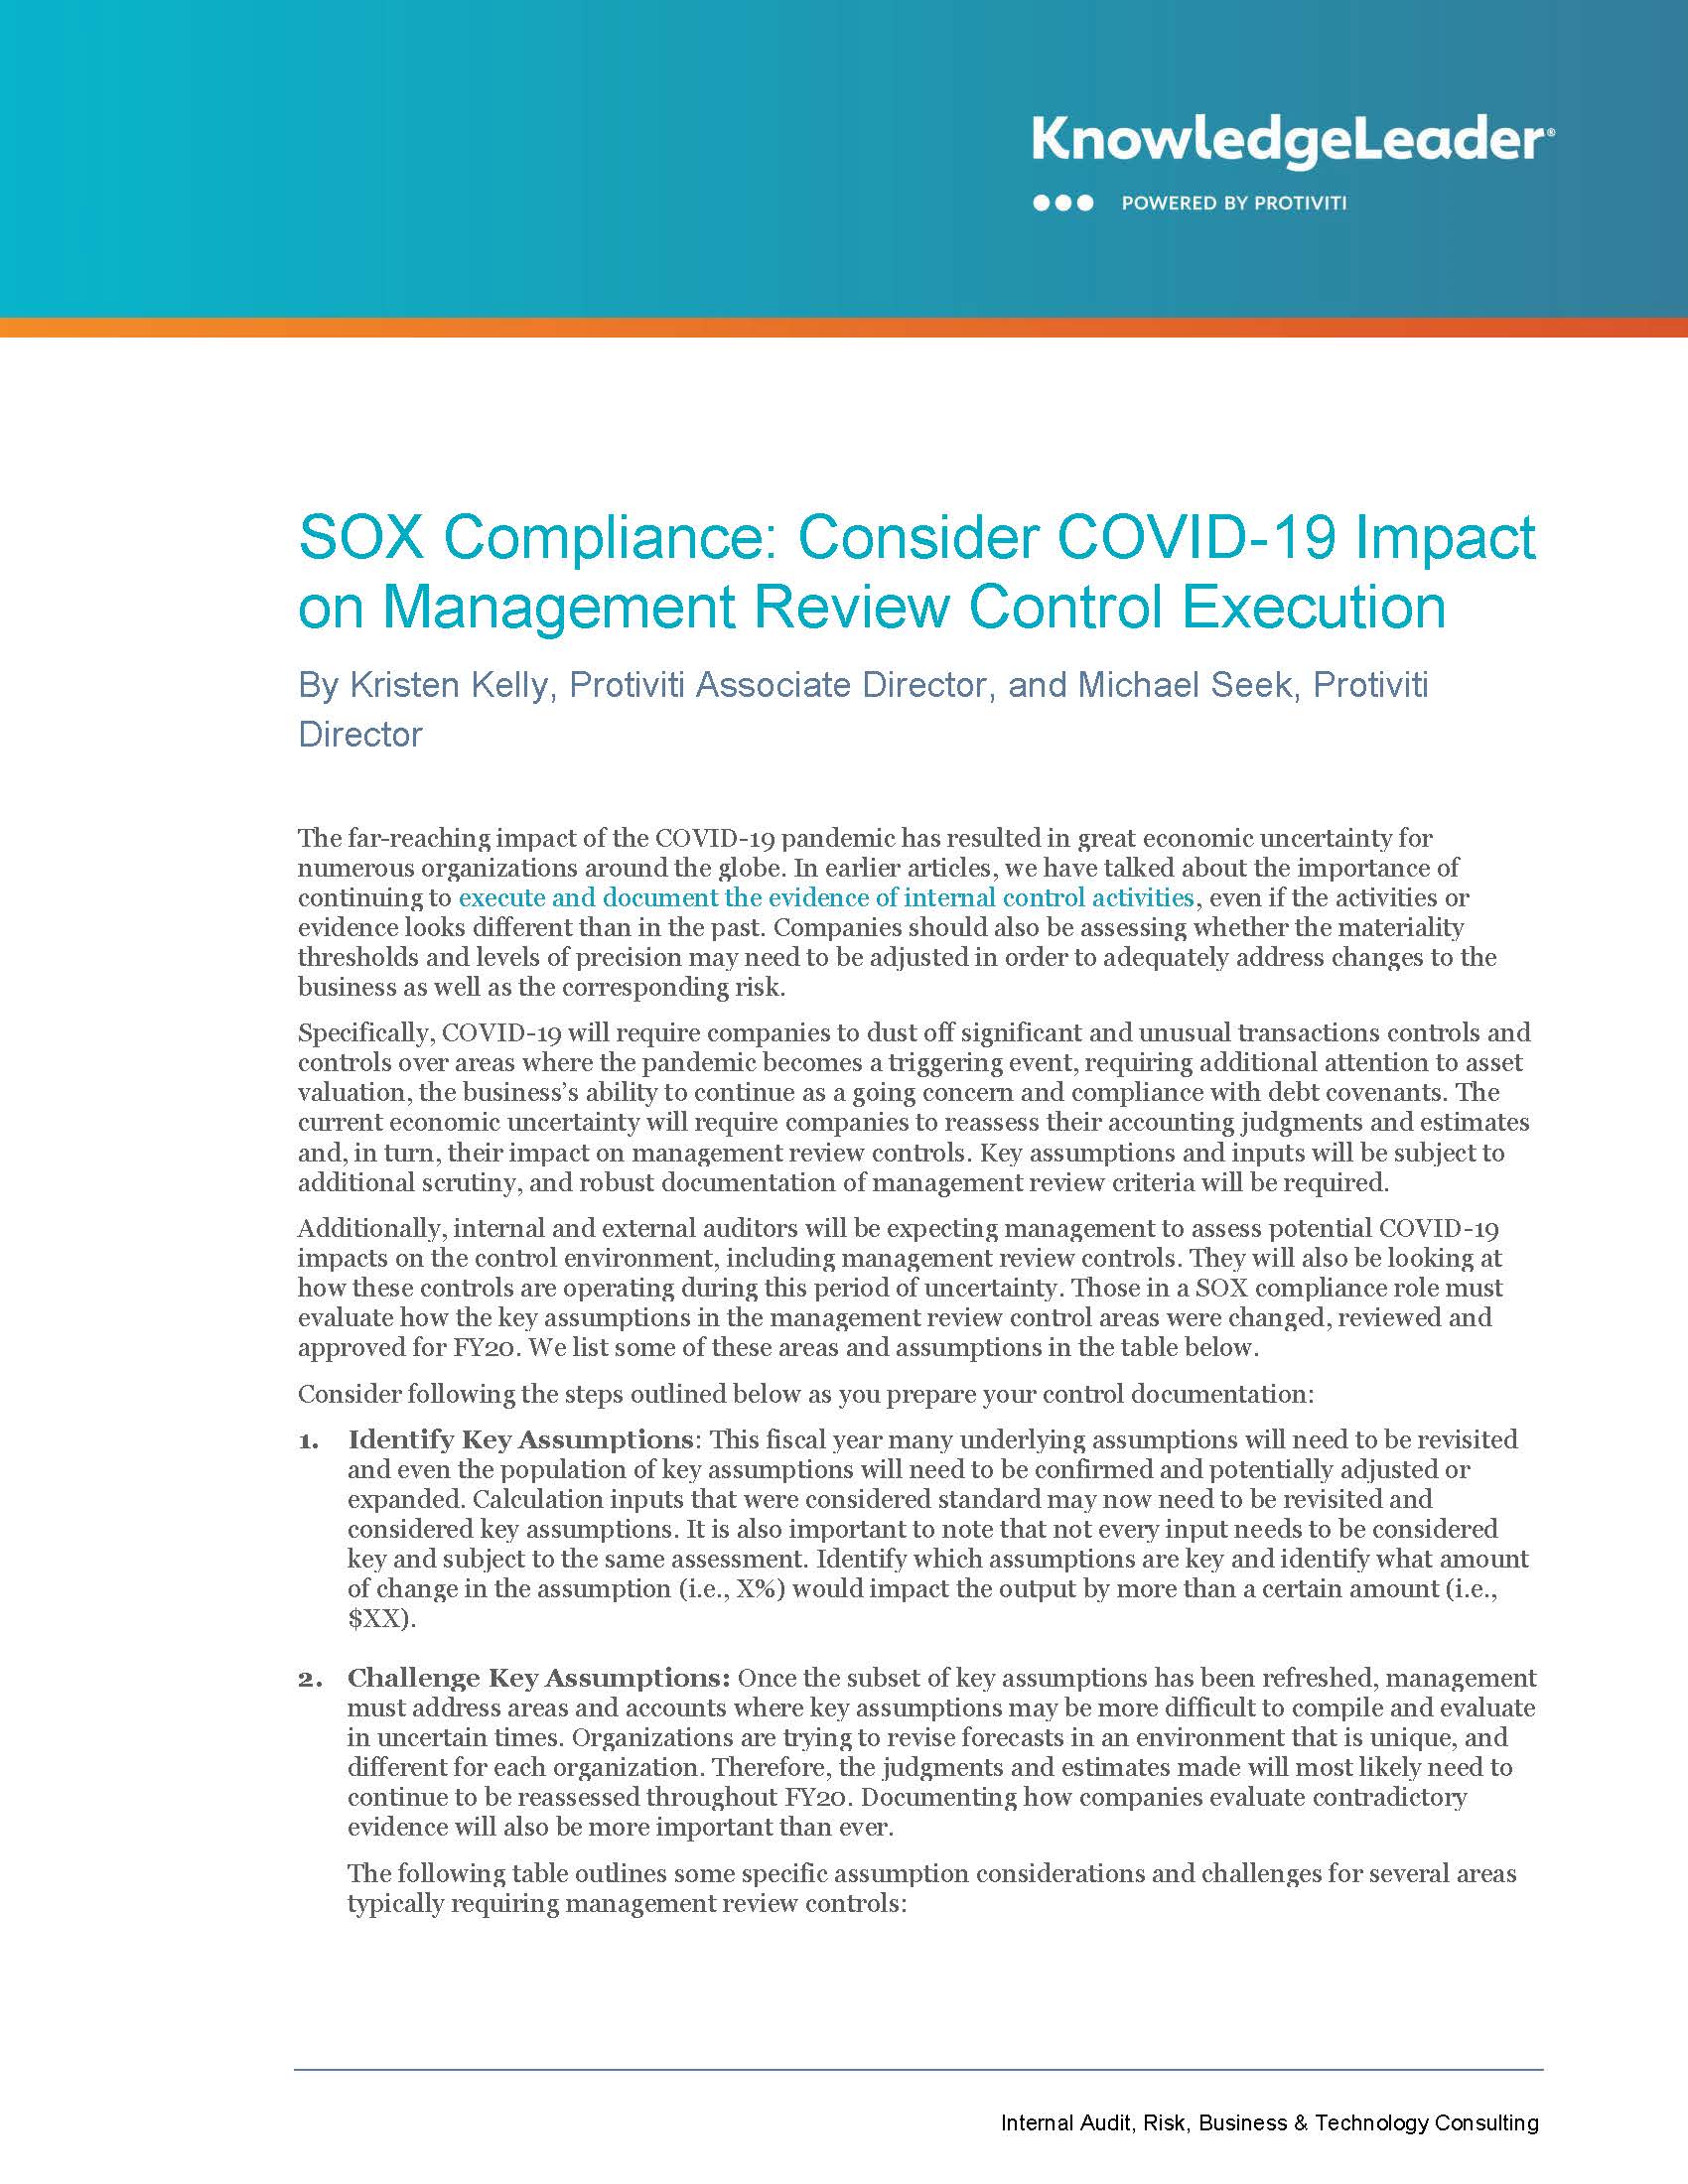 Screenshot of the first page of SOX Compliance: Consider COVID-19 Impact on Management Review Control Execution